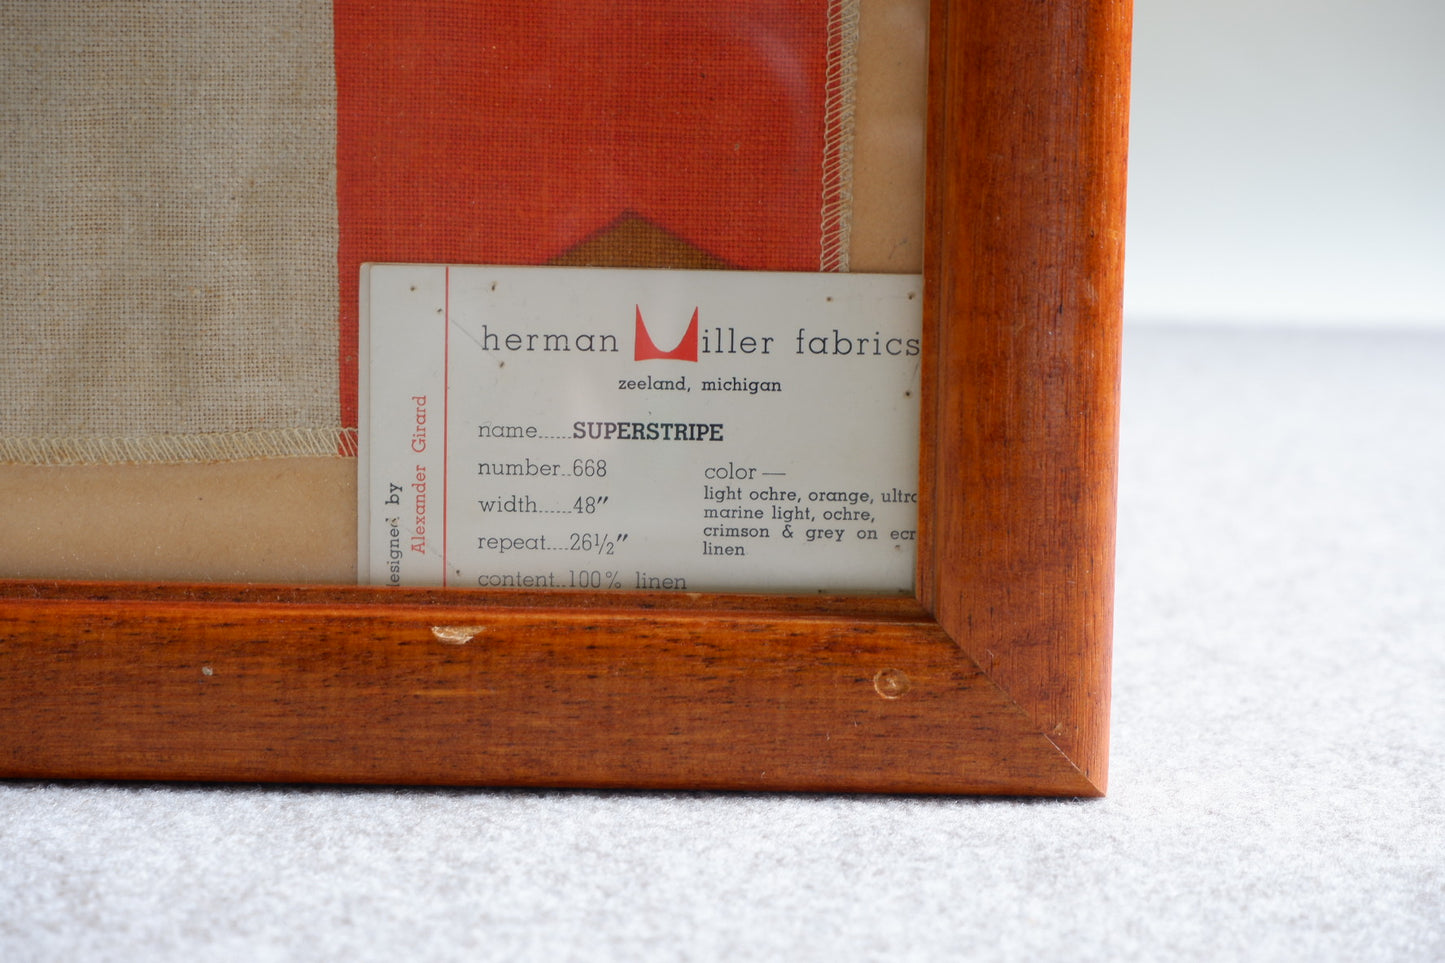 Product photo of "Herman Miller fabrics No.668 SUPER STRIPE signature” of THE ONE&ONLY